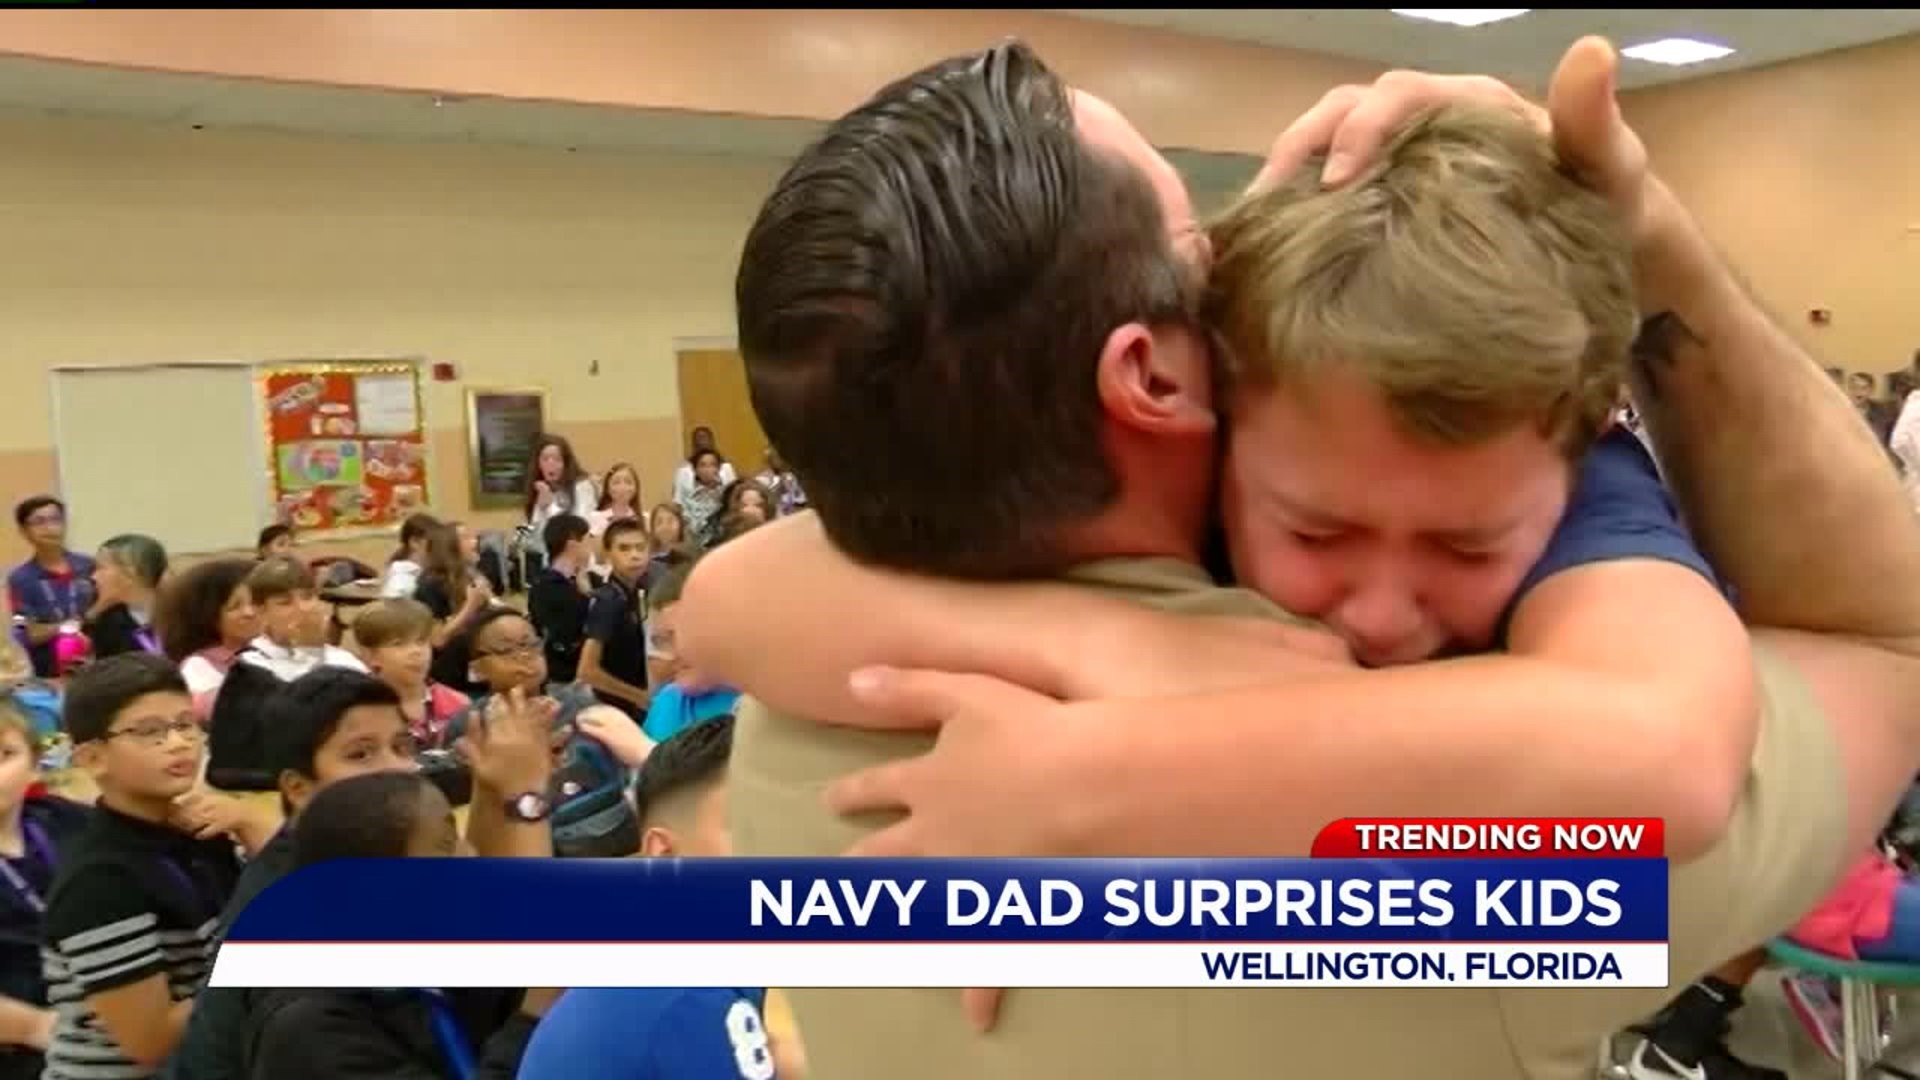 Navy dad home from Iraq surprises kids